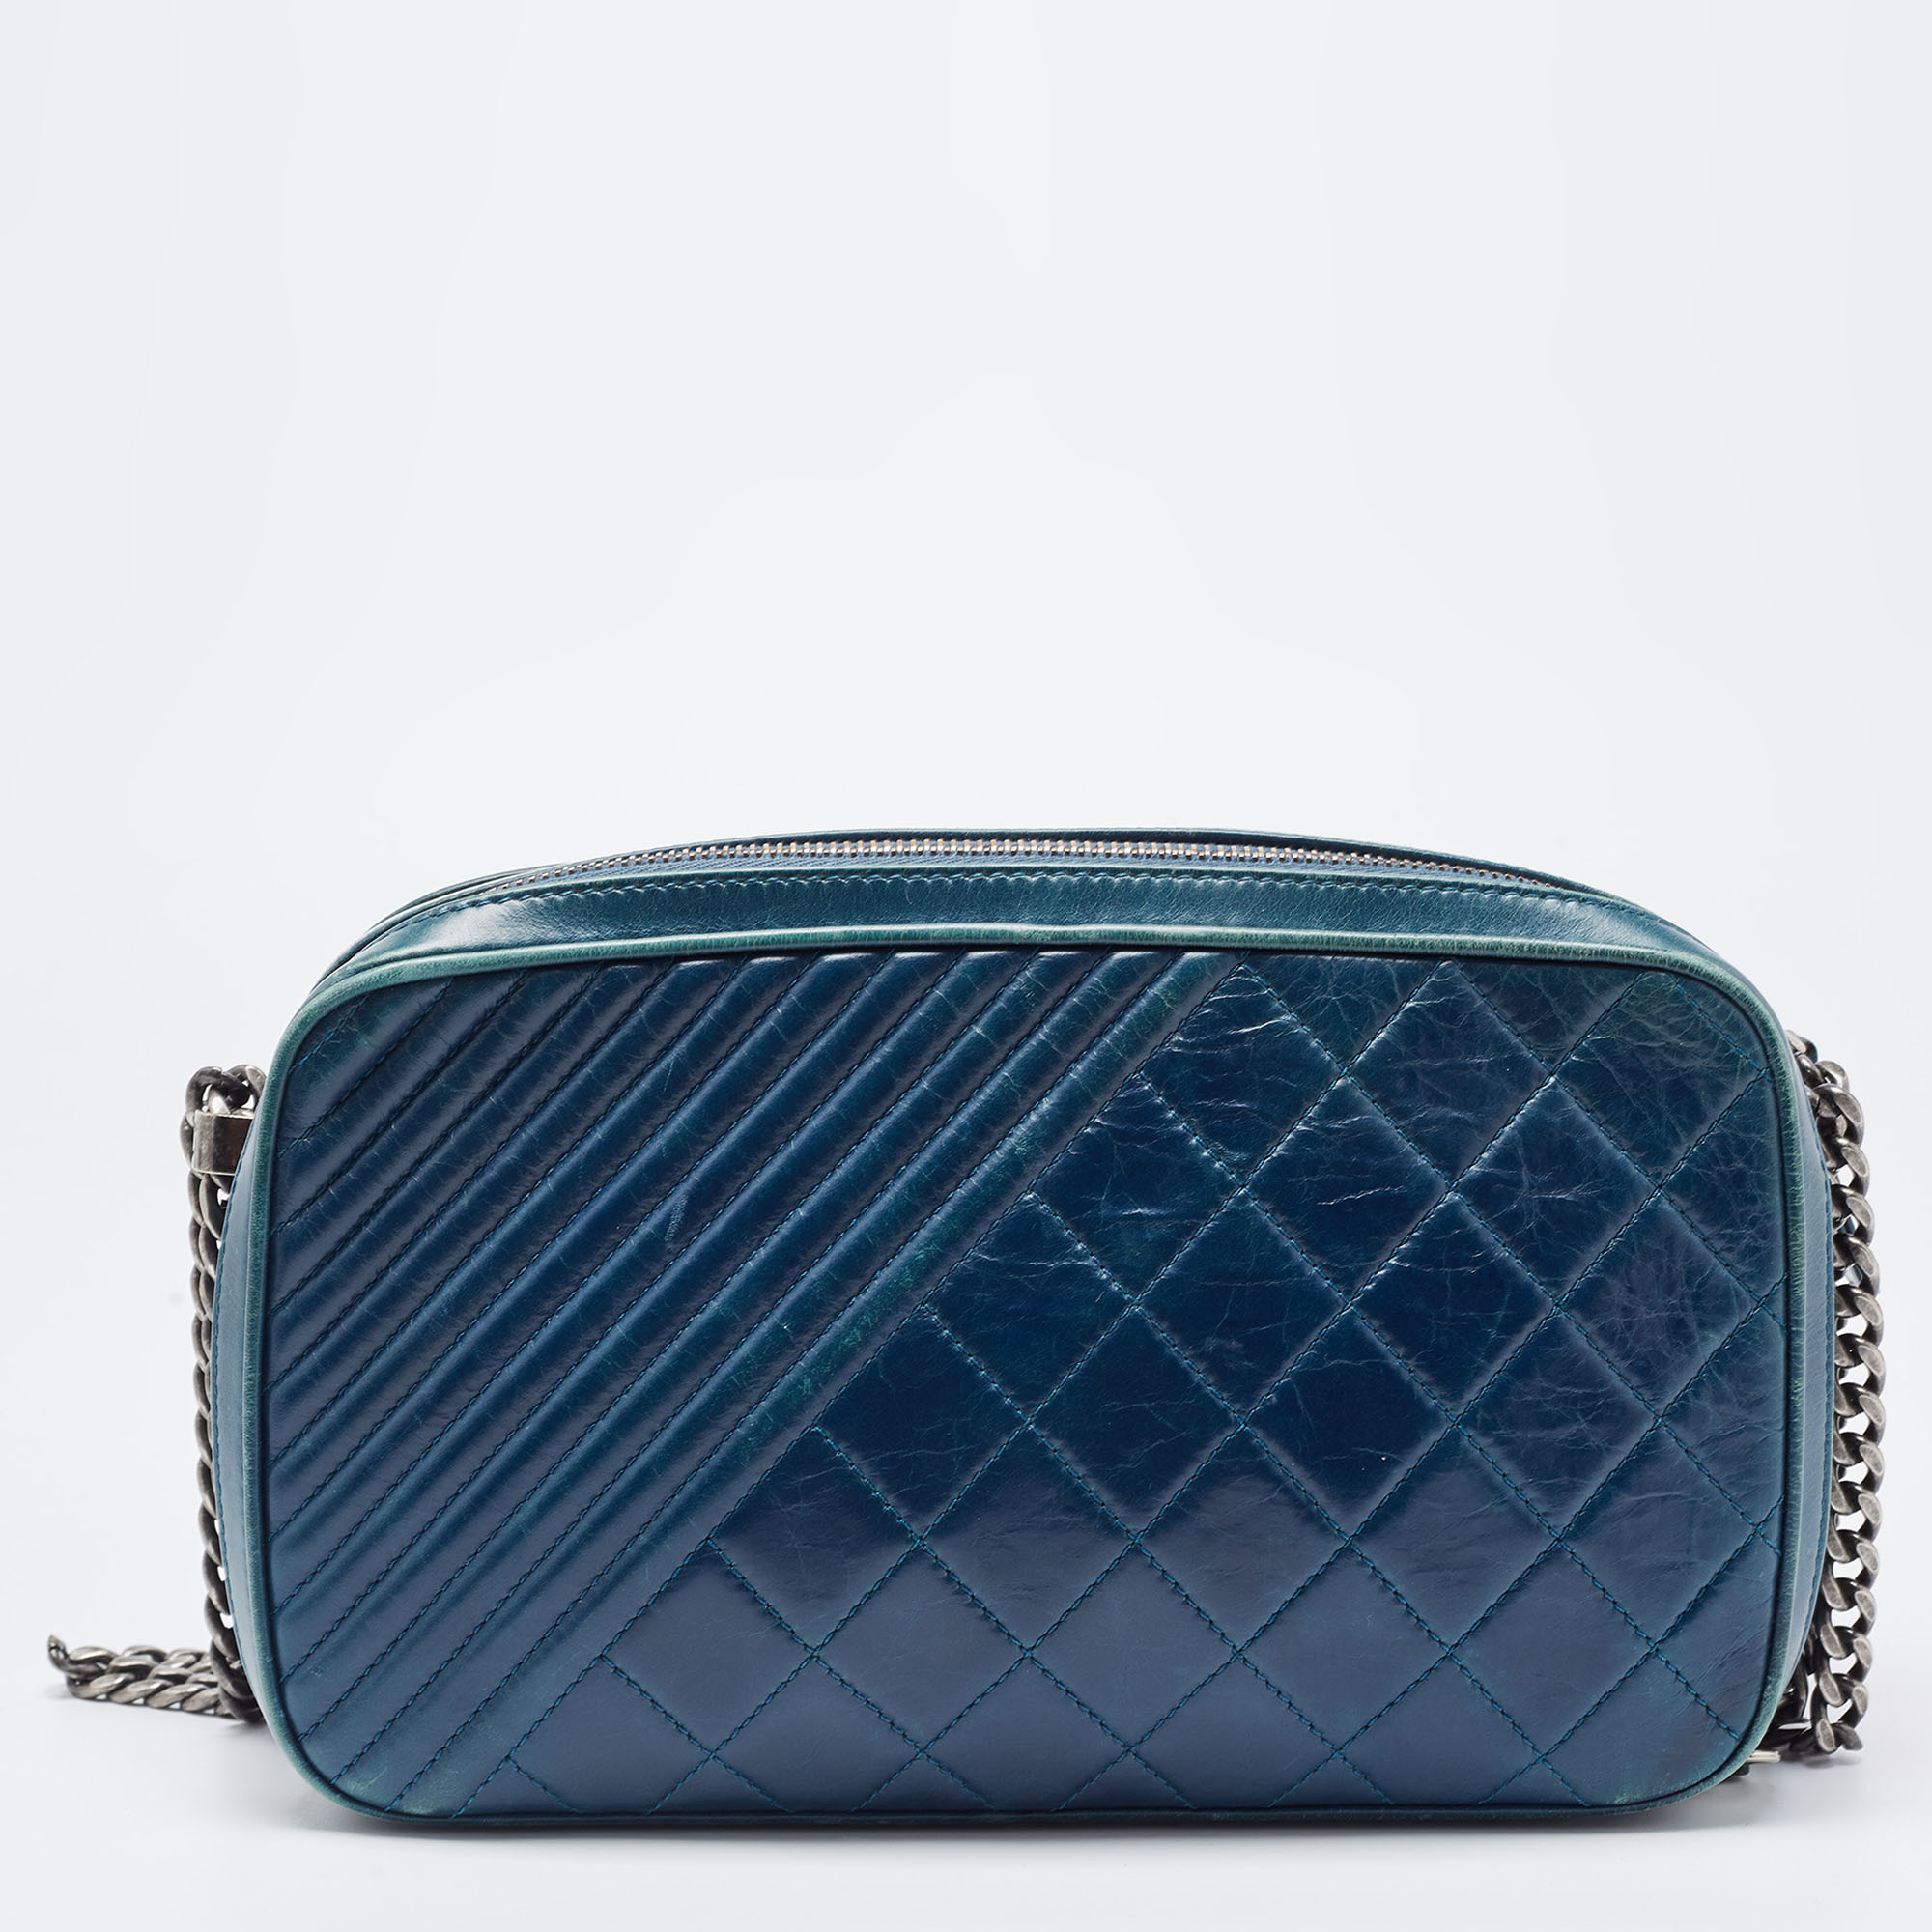 Chanel Teal Blue Quilted Leather Coco Boy Camera Case Bag